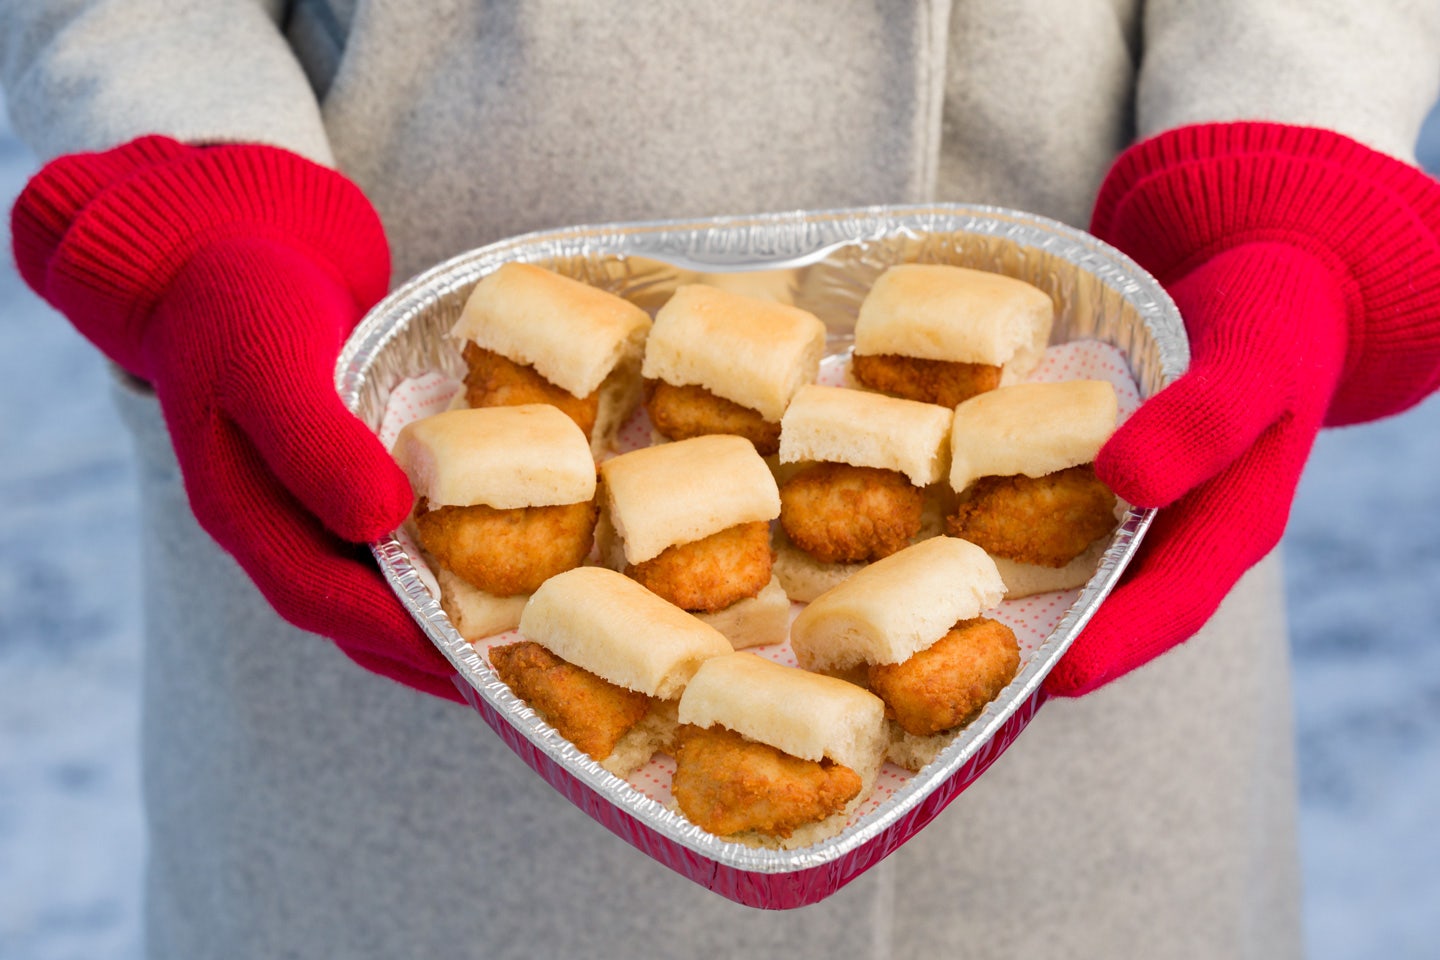 Chick-fil-A serving chicken in heart-shaped trays for Valentine's Day.